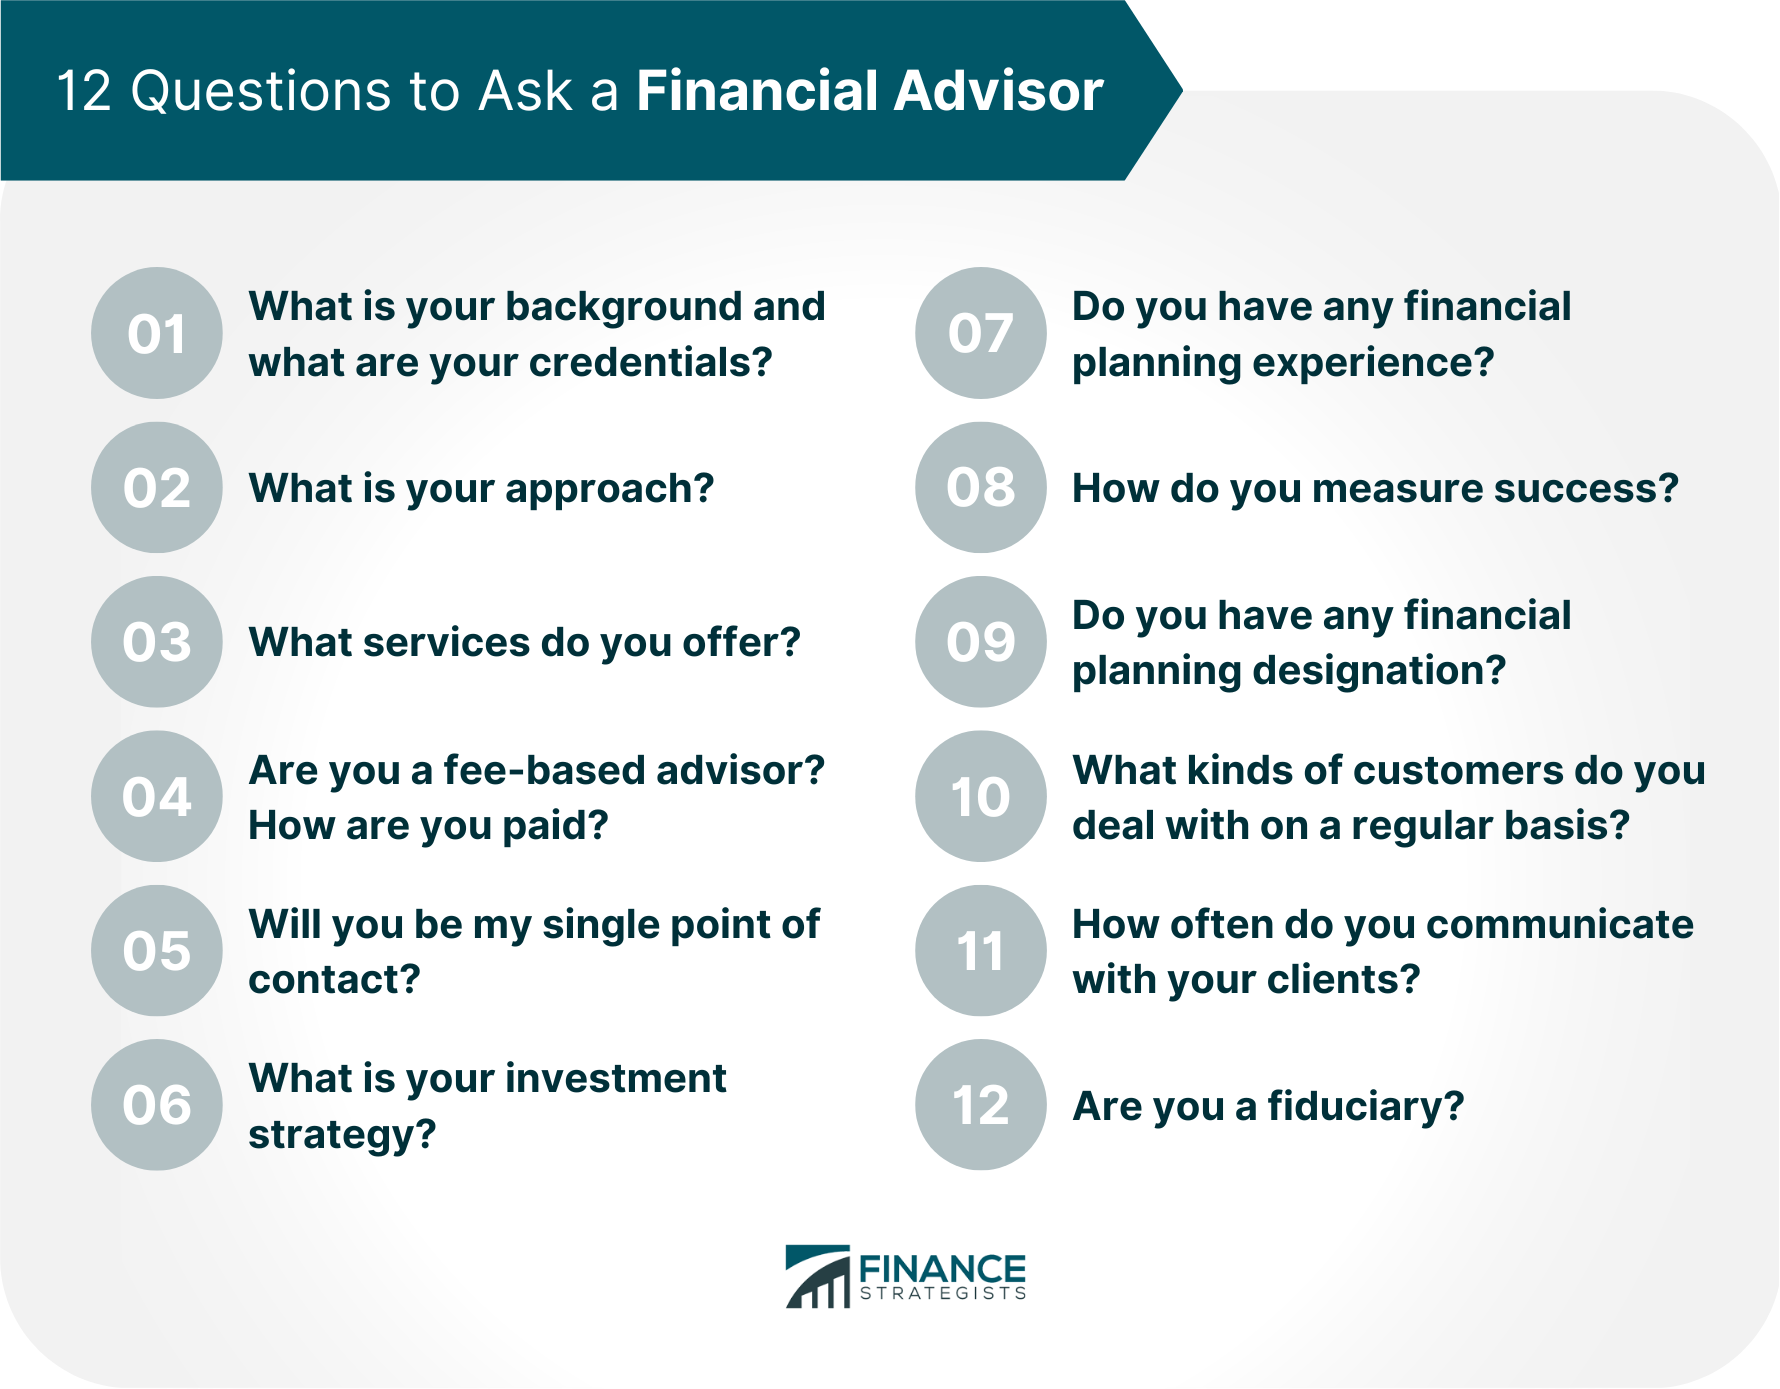 12 Questions to Ask a Financial Advisor